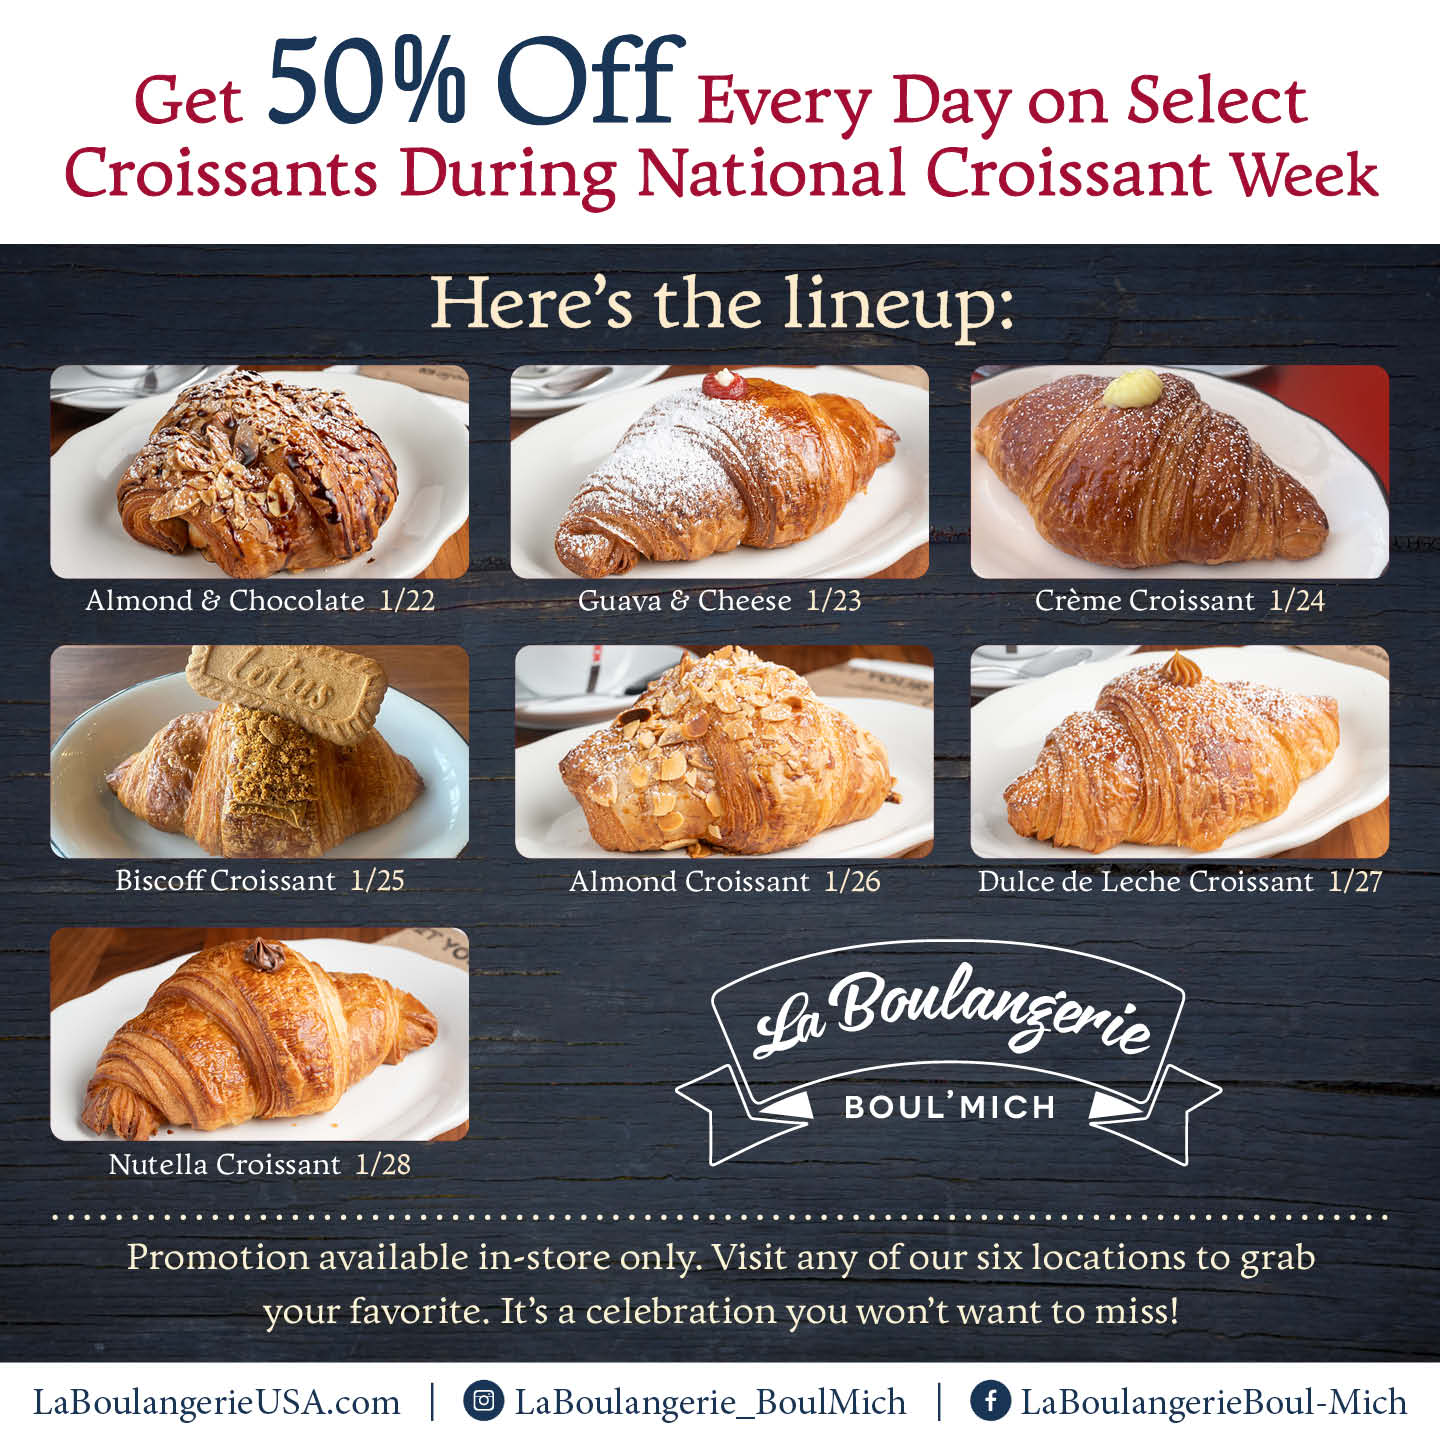 La Boulangerie Boul’Mich National Croissant Week is BACK and we're celebrating our flaky, buttery, fresh-baked croissants.